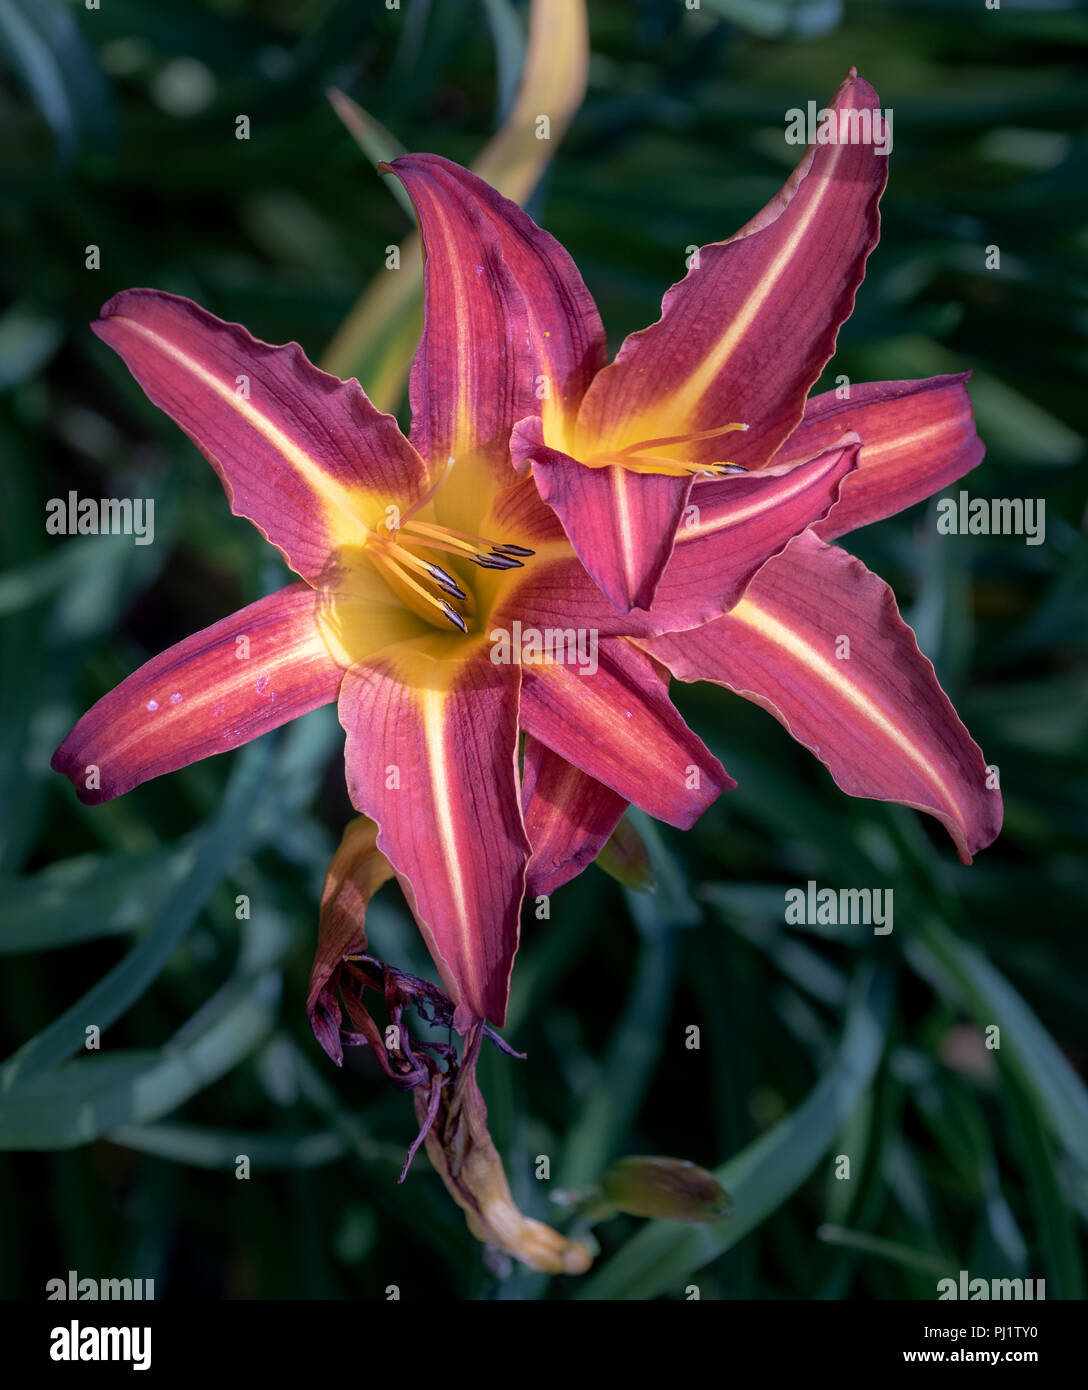 Colorful outdoor nature macro image of a blooming purple red yellow daylily blossom on a natural green blurred background taken on a sunny summer day Stock Photo